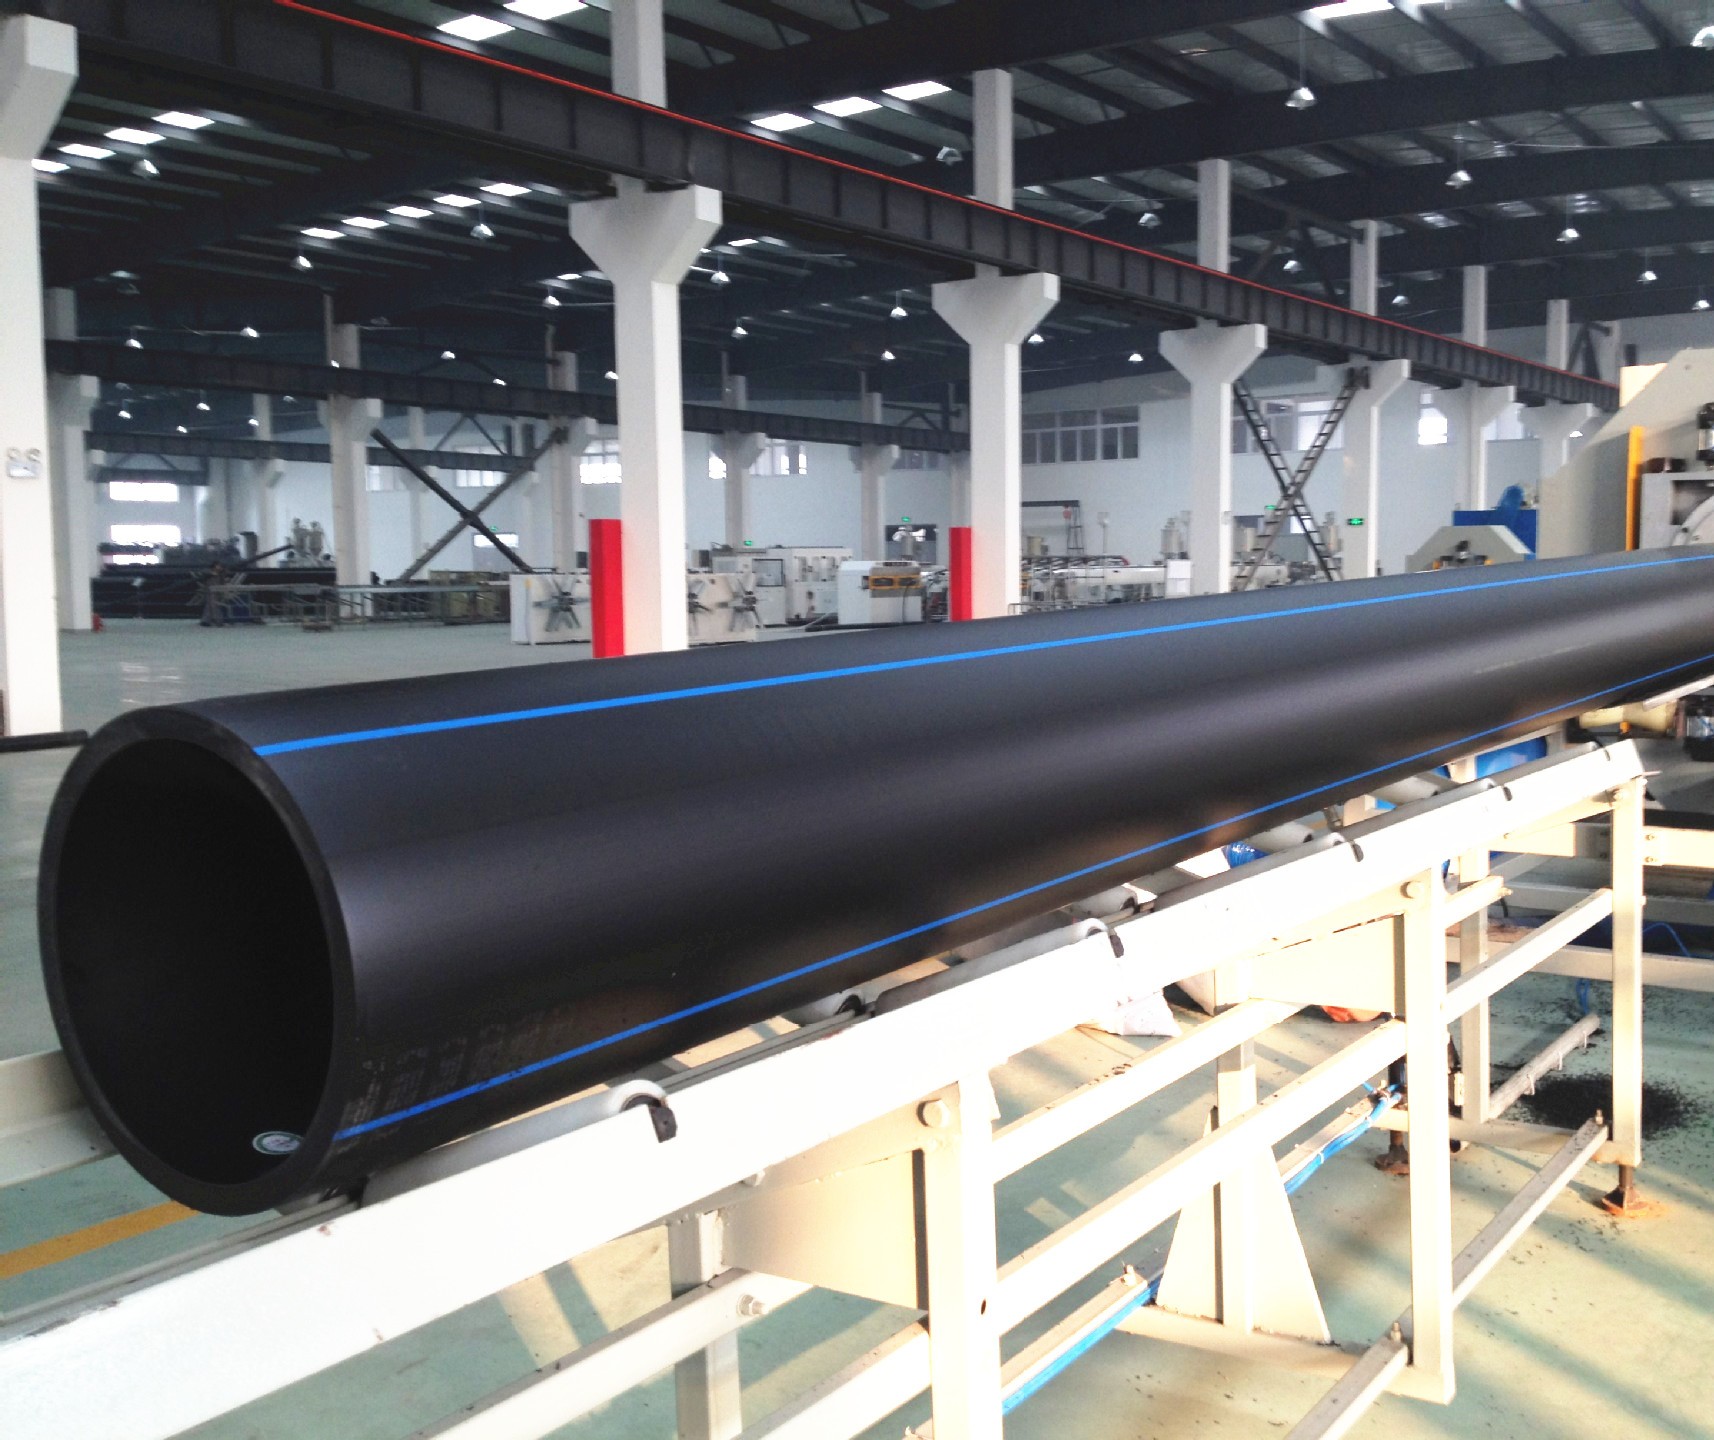 HDPE Water Supply Pipe Manufacturers, HDPE Water Supply Pipe Factory, Supply HDPE Water Supply Pipe